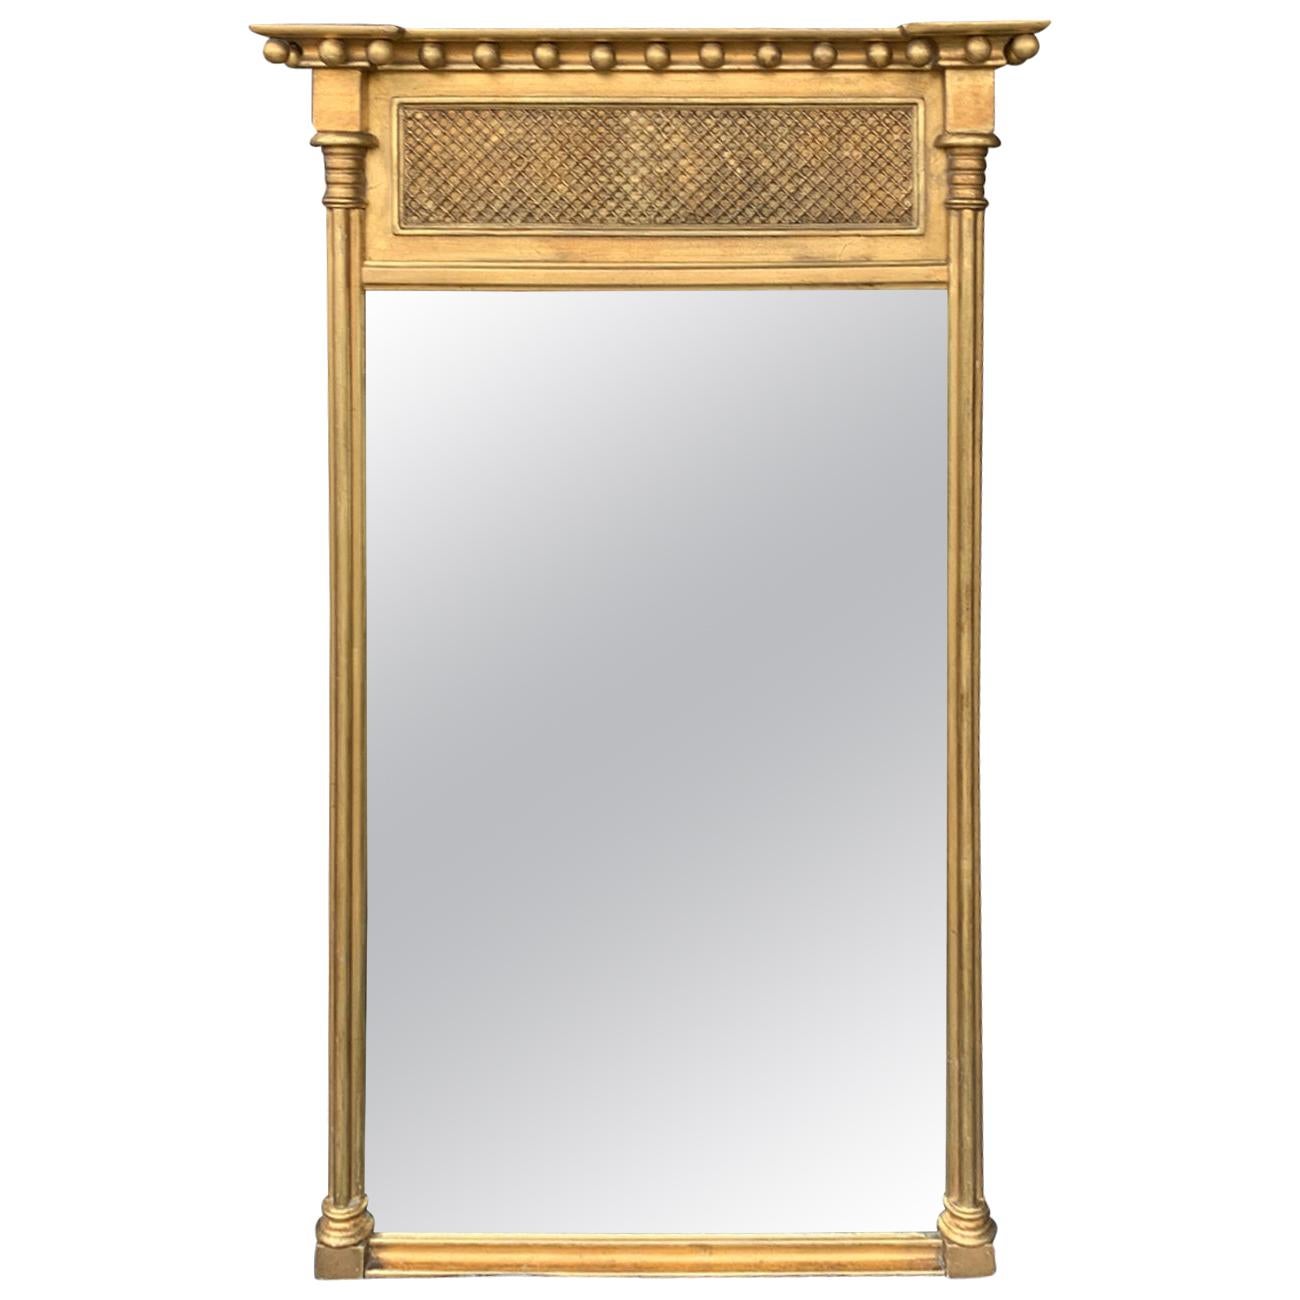 Early 20th Century Regency Style Giltwood Borghese Mirror, Labeled